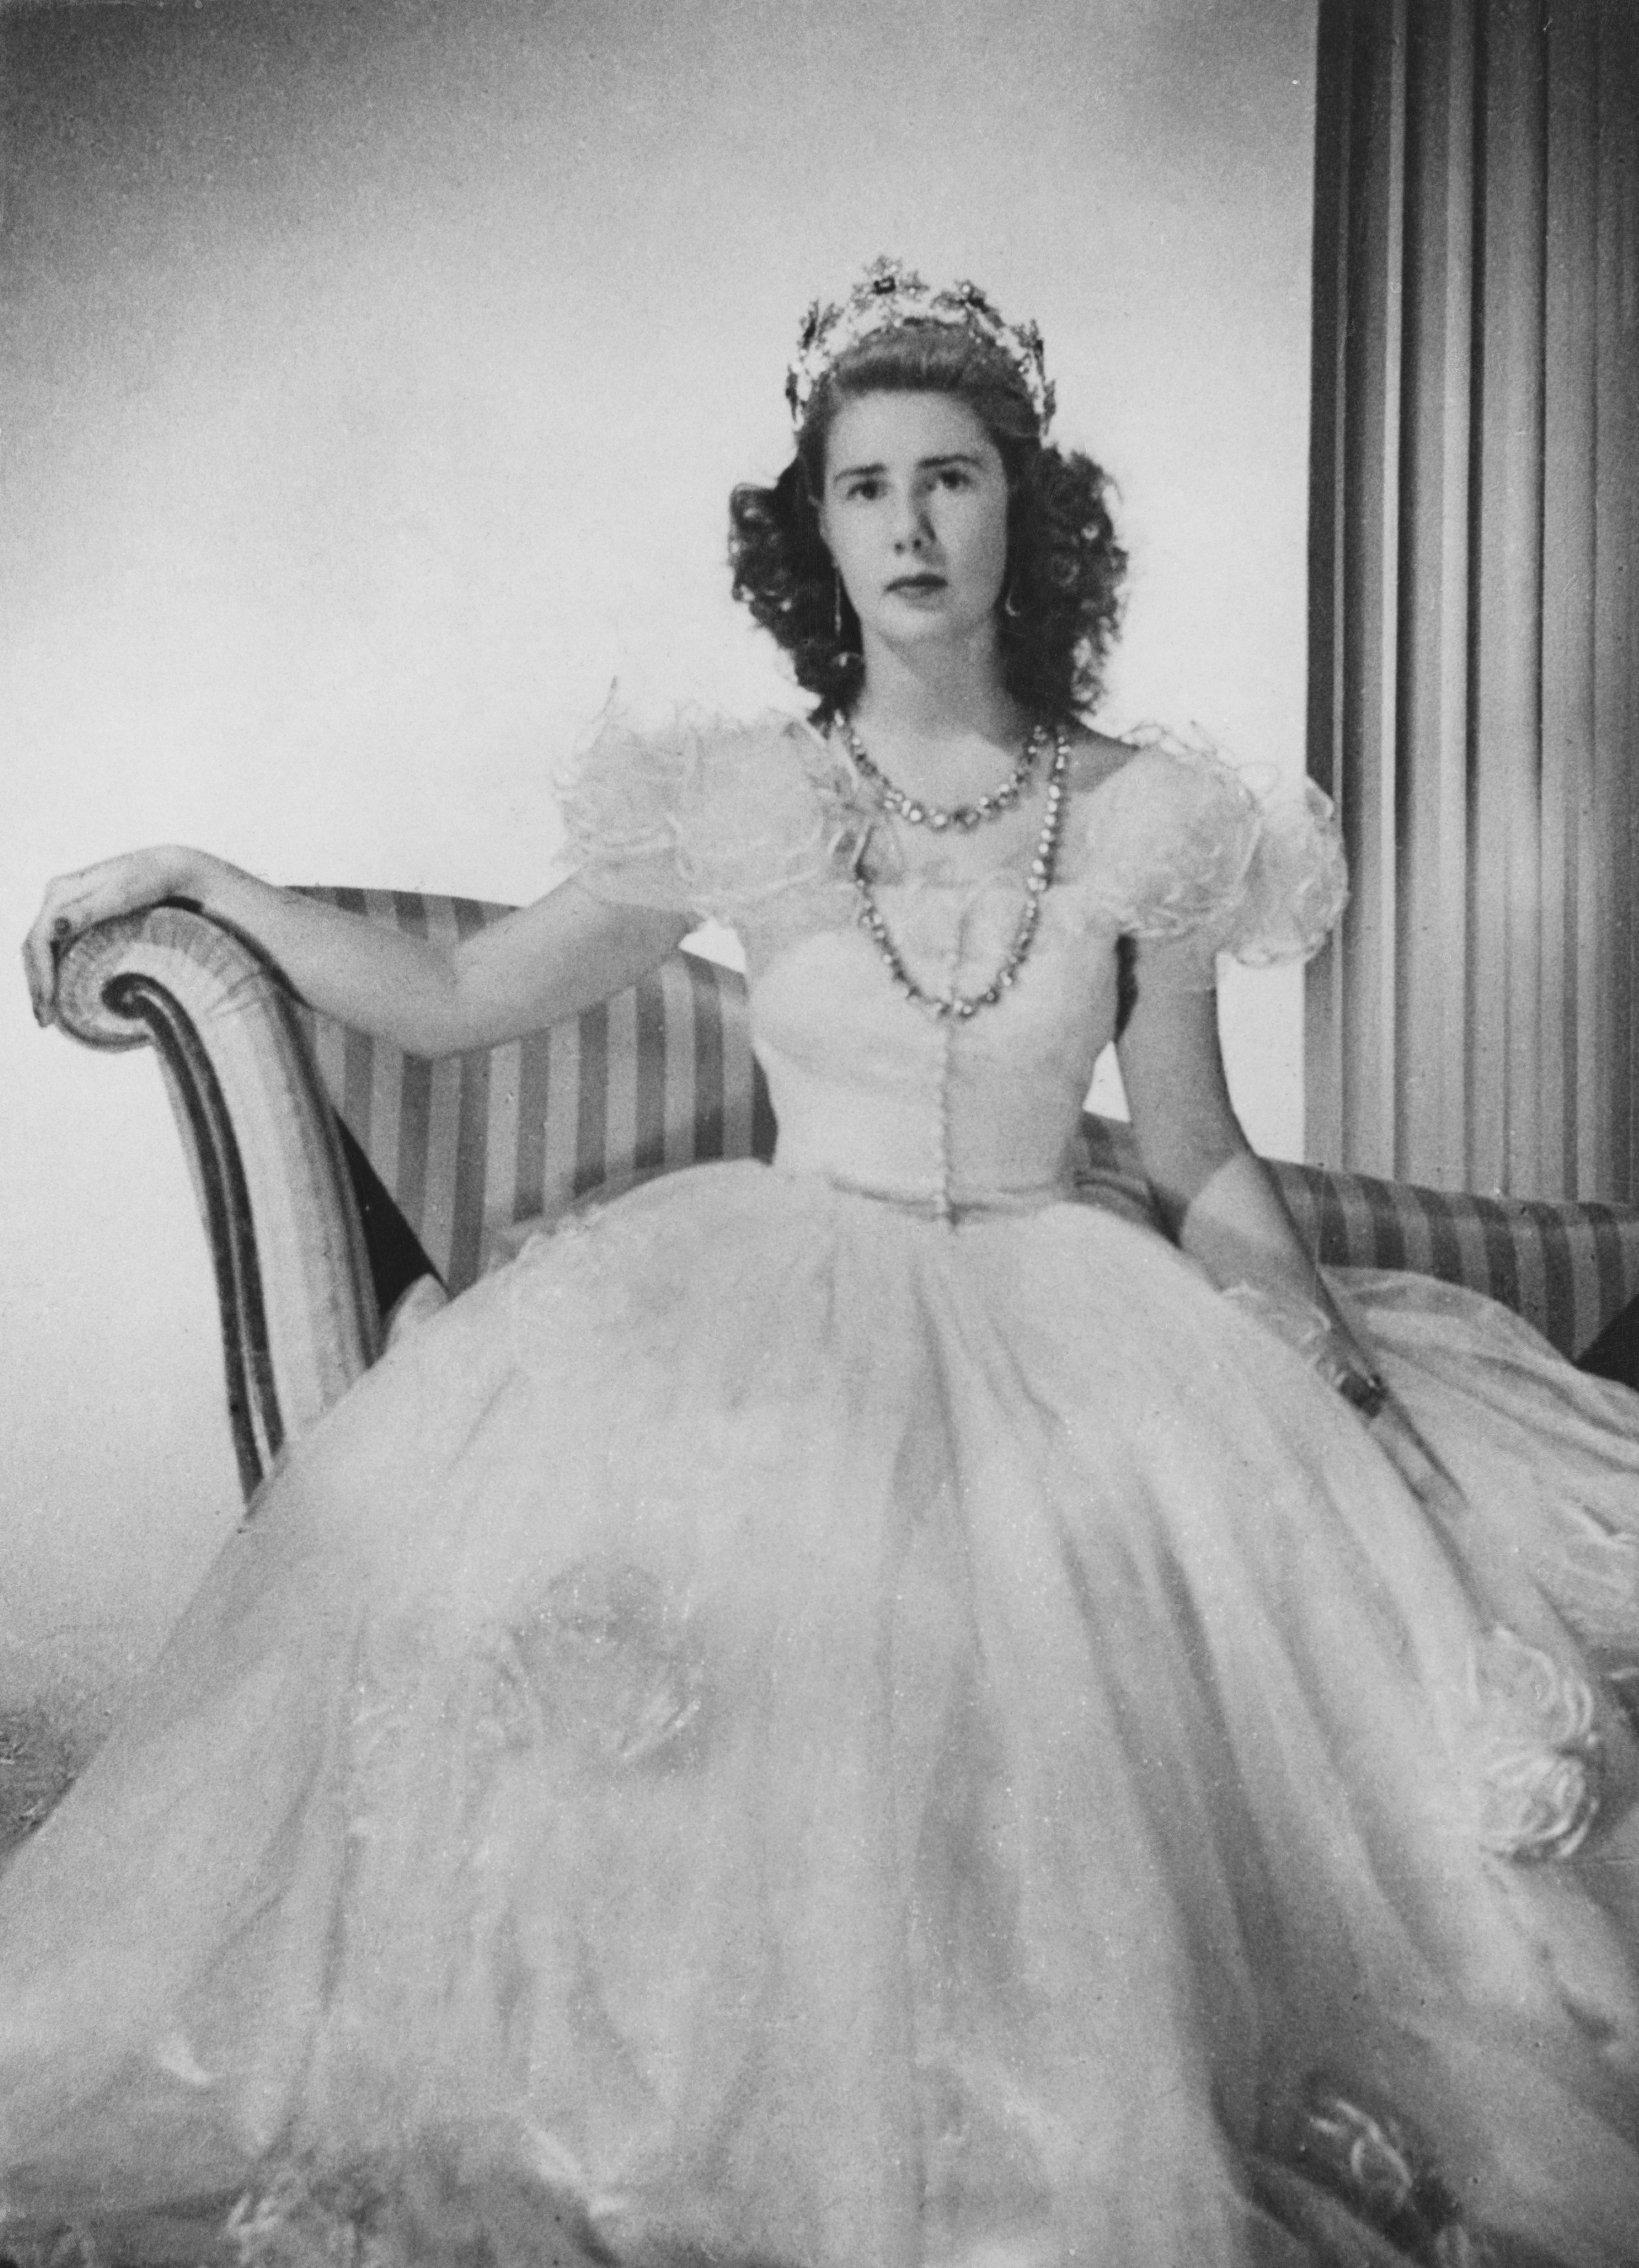 The Duchess of Alba, Maria del Rosario Cayetana Fitz-James Stuart photographed in 1947. | Source: Getty Images